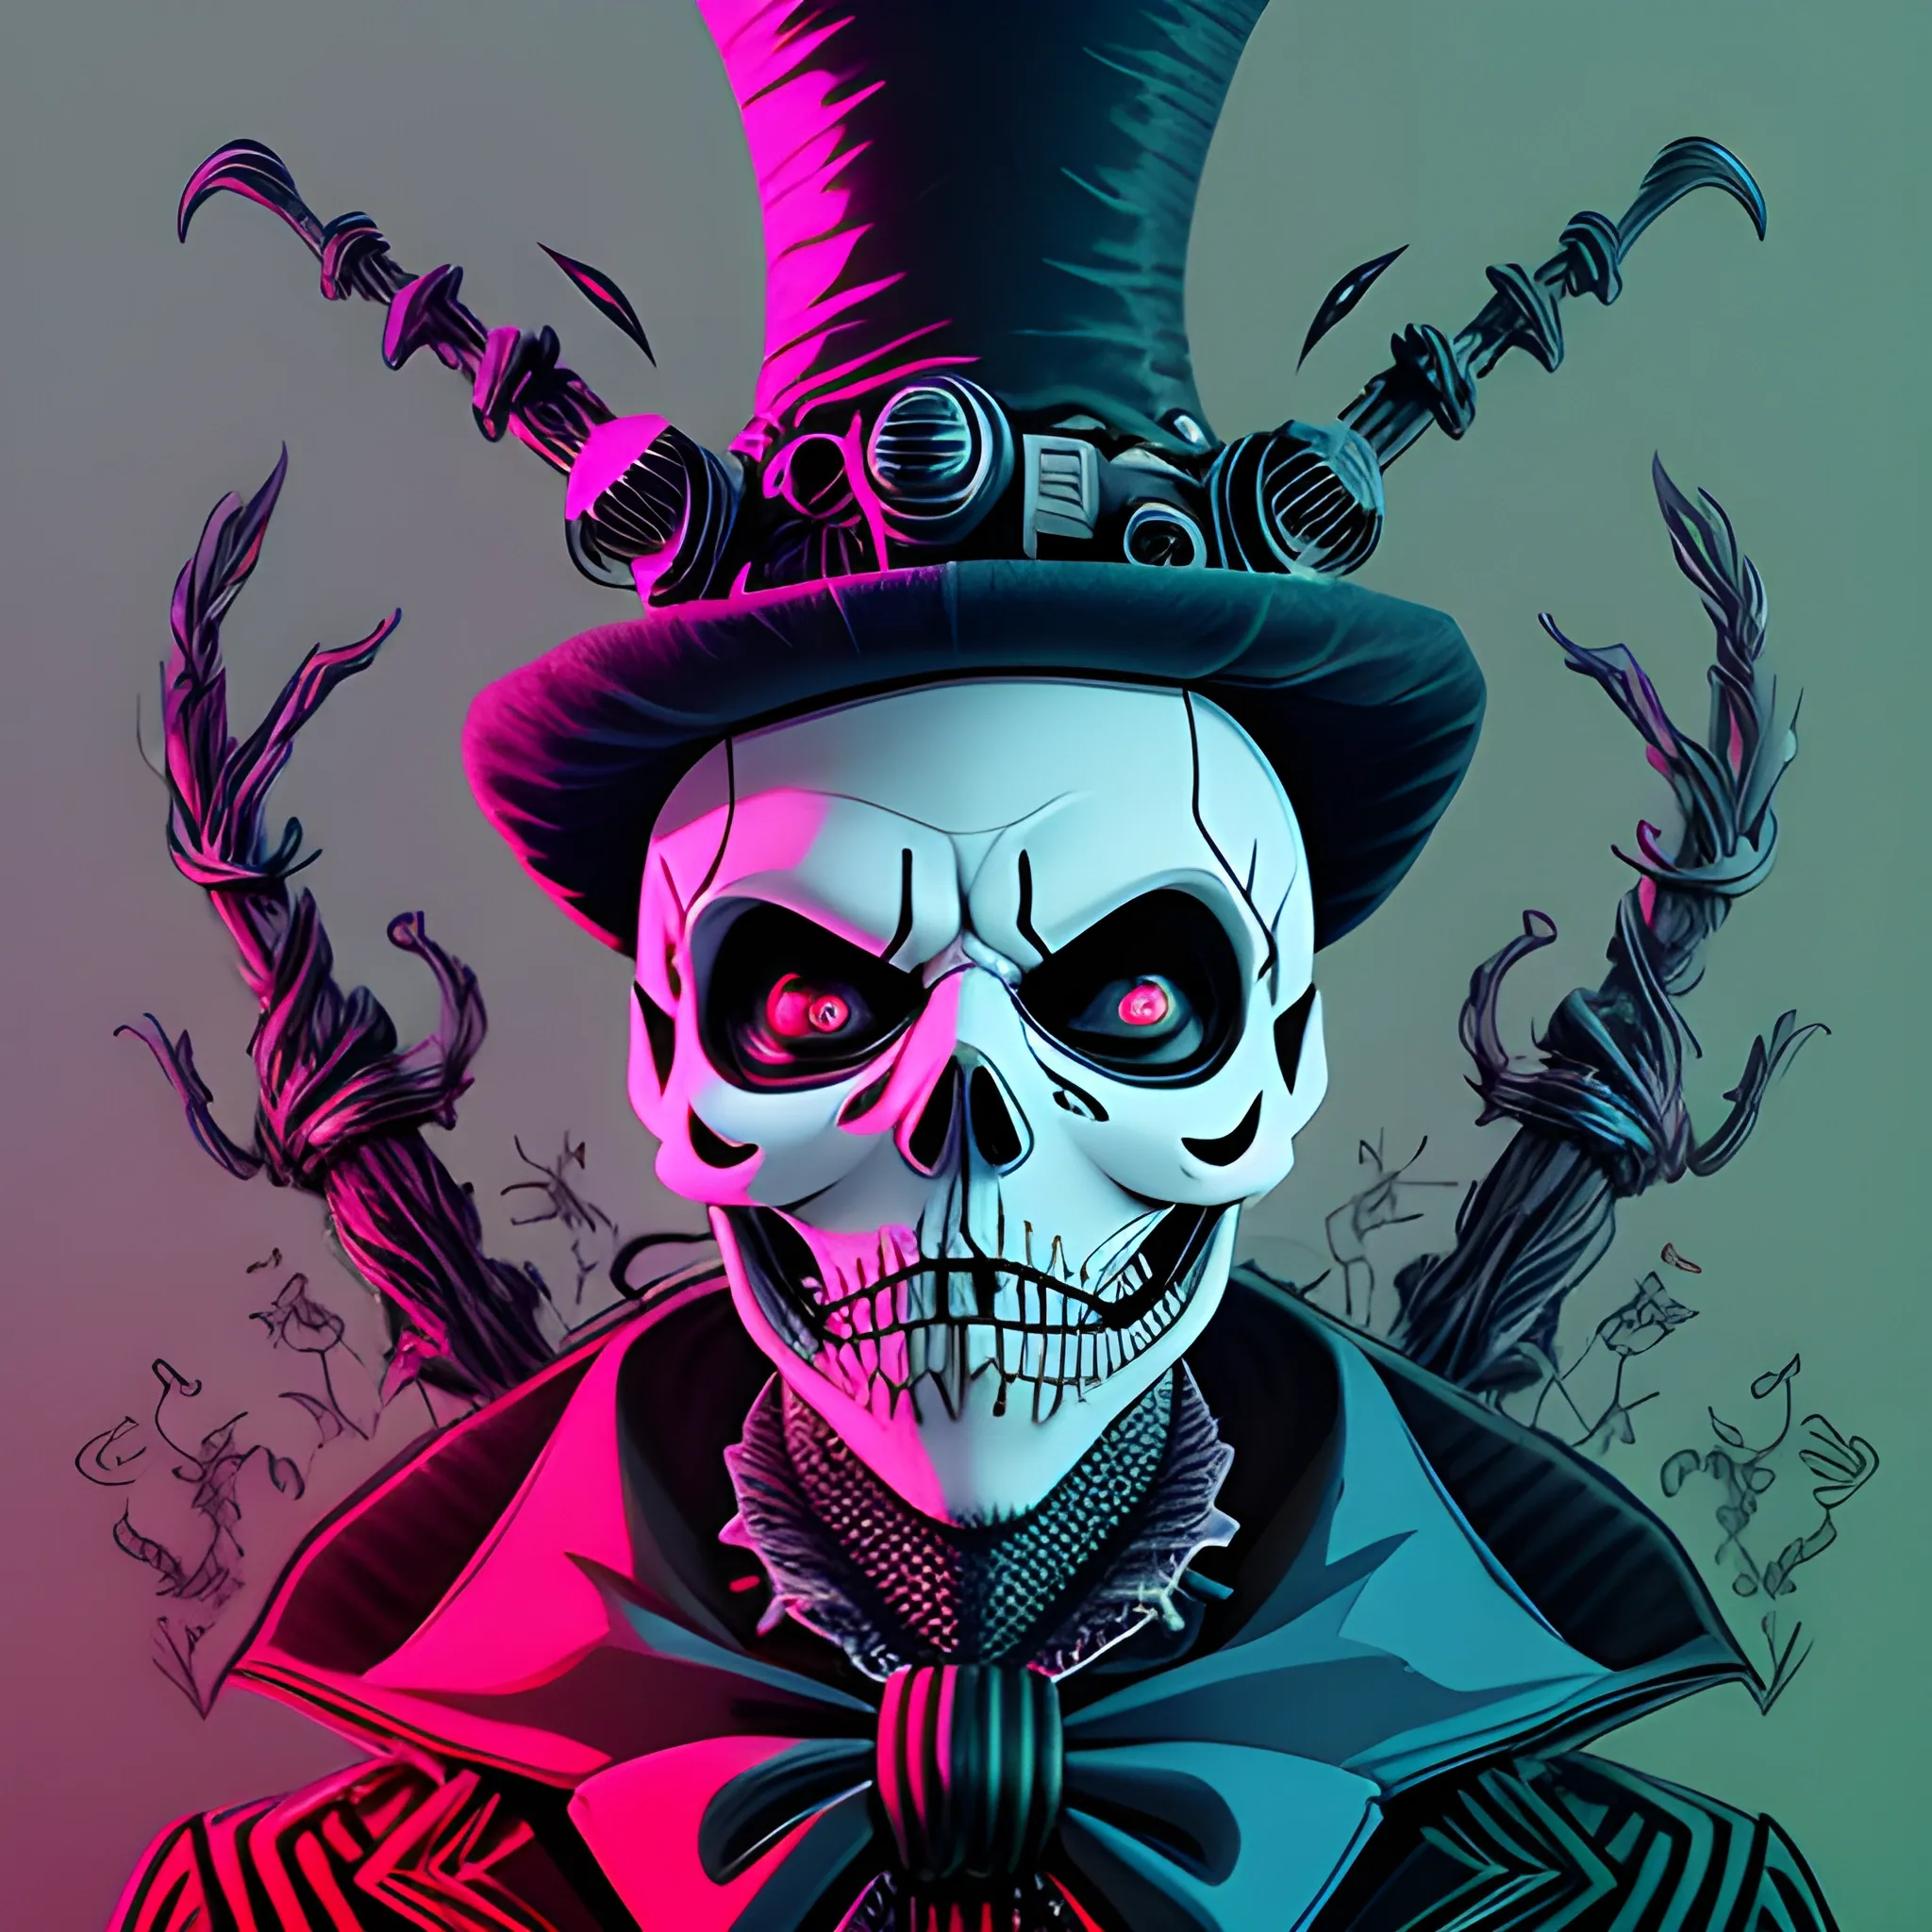 Cyber Skull  Jack Skellington from the nightmare before christmas wearing the mad hatter from Alice in wonderland hat Logo design,  wlop,  ilya,  ultra hyper-detailed, dark fantasy art,  demonic,  sinister,  extremely well drawn and design,  NFT perfection, perfect composition, surrealism,  neon noir outlines, Disney Style,  cartoonish style,  2D, fantasy,  detailed,  vibrant colours,  colorful smoke, colorful vapor,  vibrant colors,  vivid, omen theme,  lightning storm,  thunder striking,  Poster style,  NFT, goth vibe, cyberpunk,  noir,  character model sheet, game art concept,  Meticulous, elaborate,  darkness, toxic, industrial music scene,  steampunk, hard-core, horror style themed, Pencil Sketch